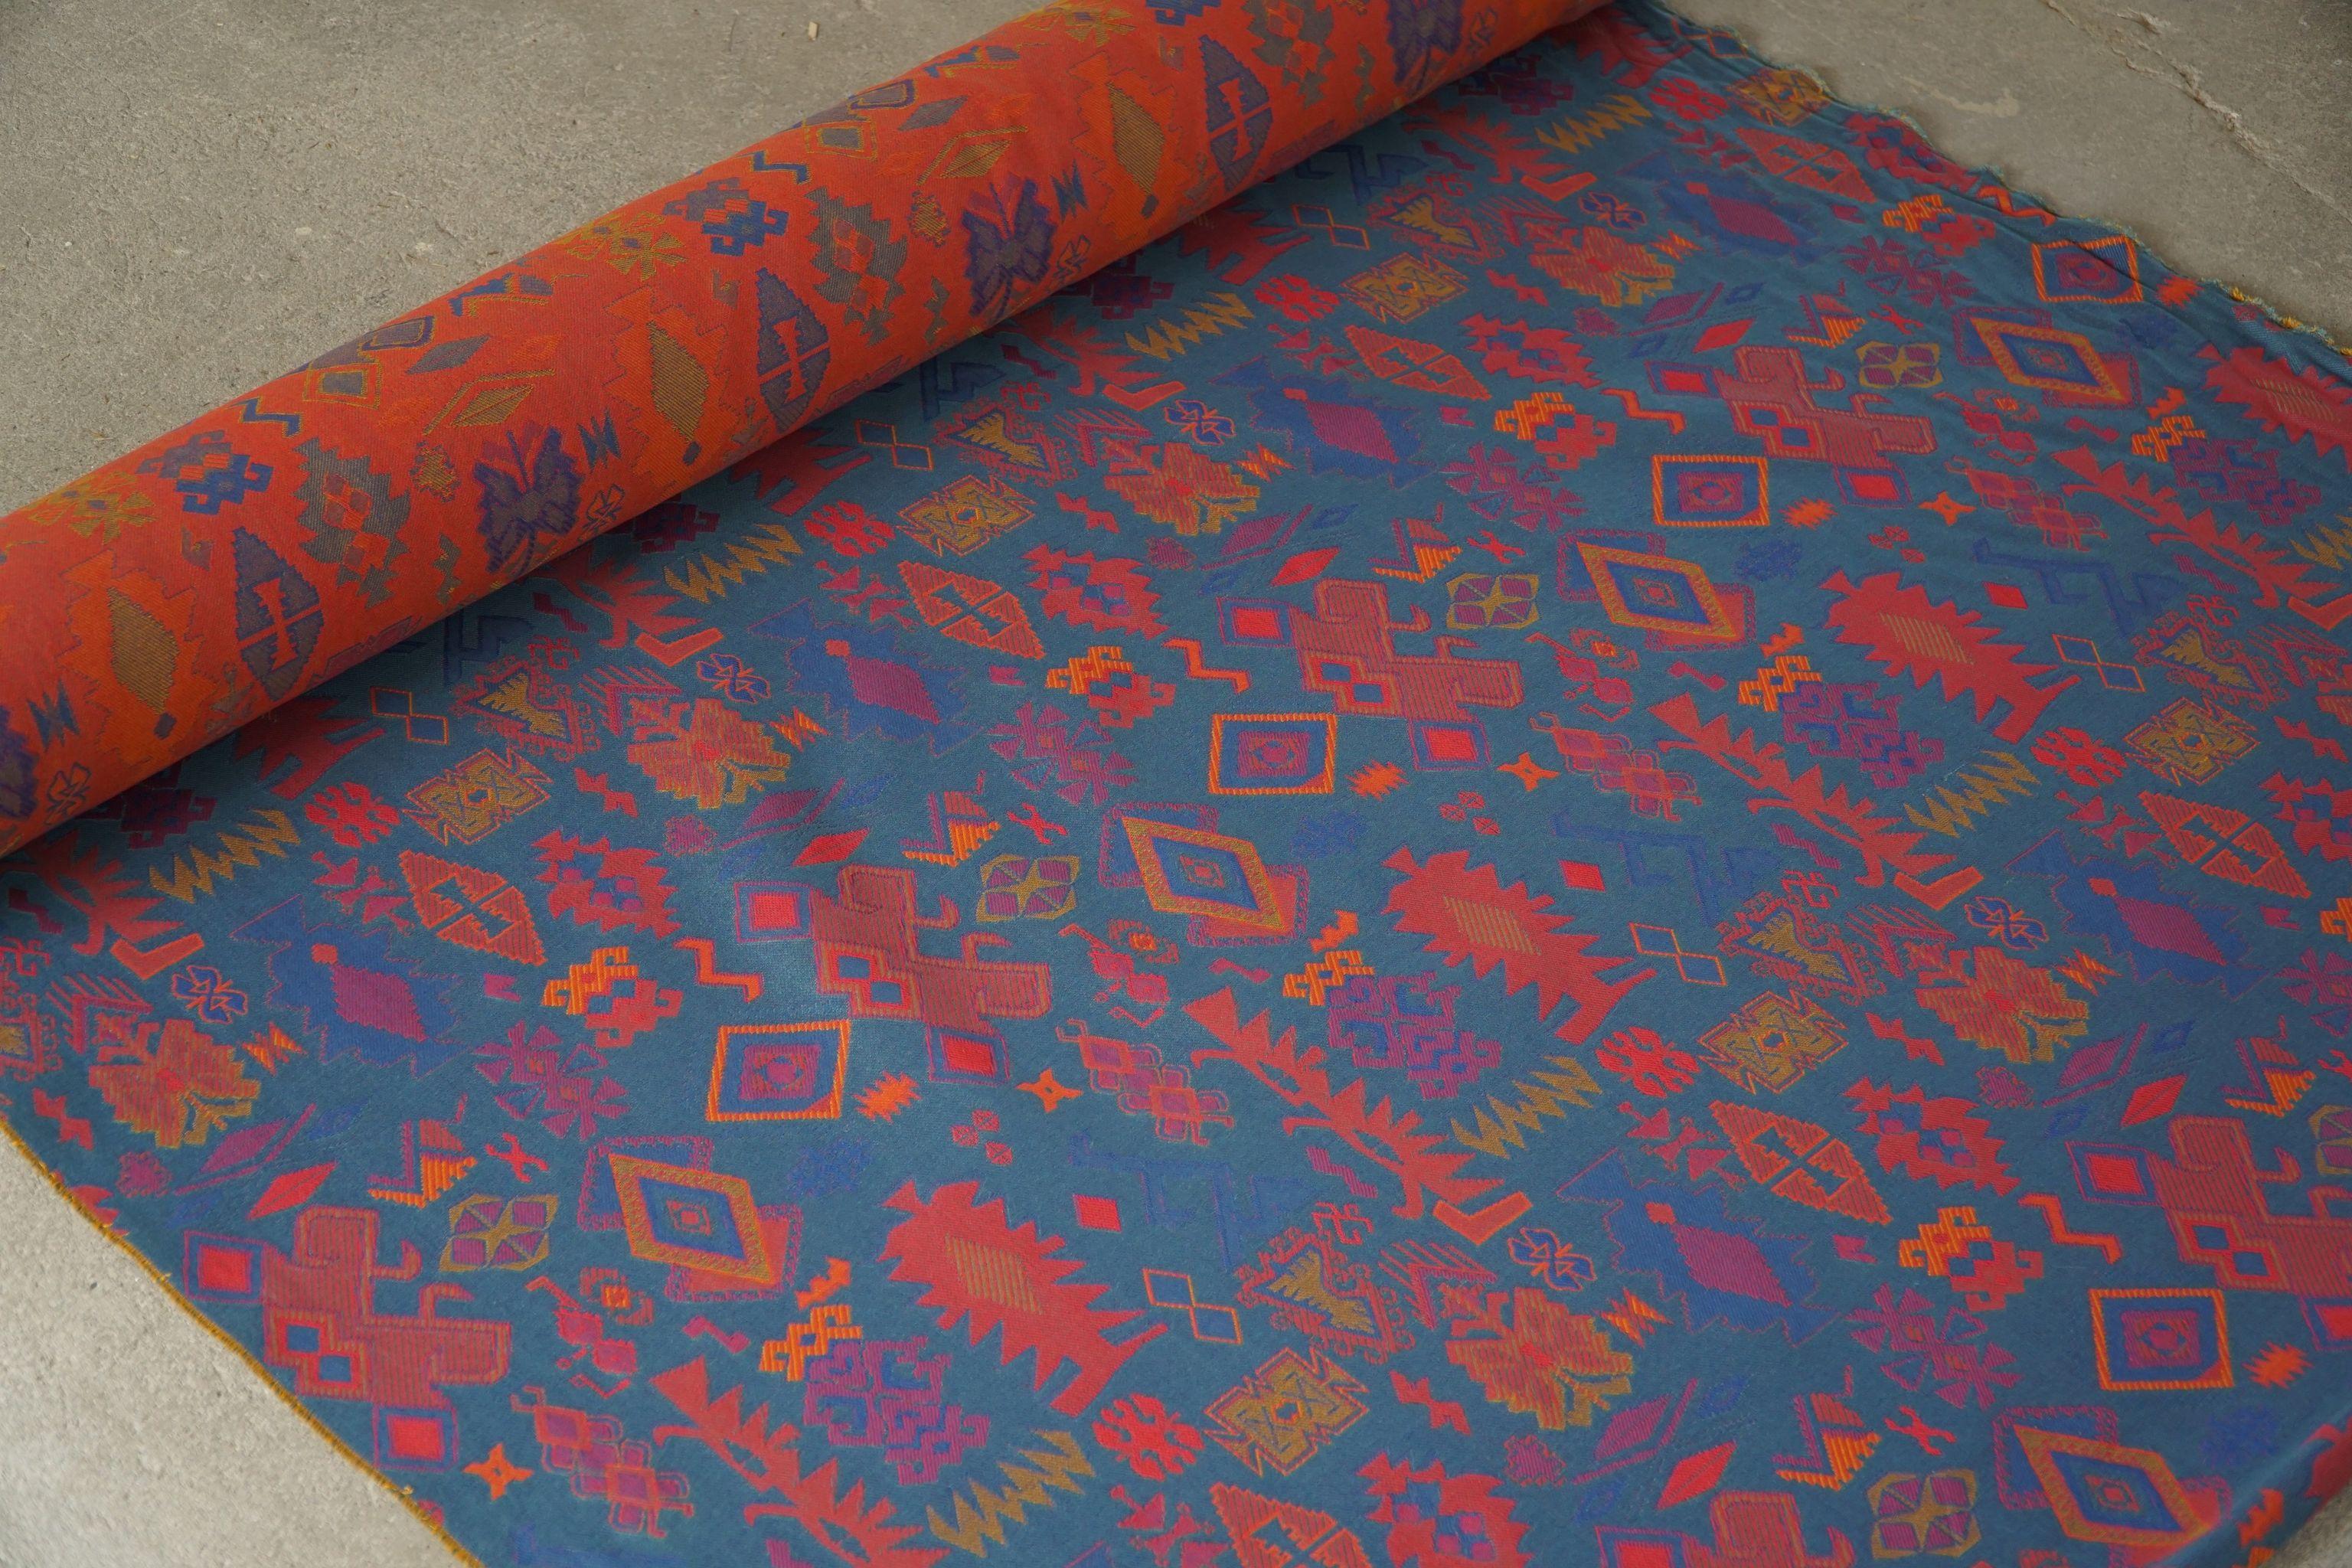 Vintage Gobelin Upholstery Fabric in Various Blue & Red Colors, Late 20th C In Excellent Condition For Sale In Odense, DK